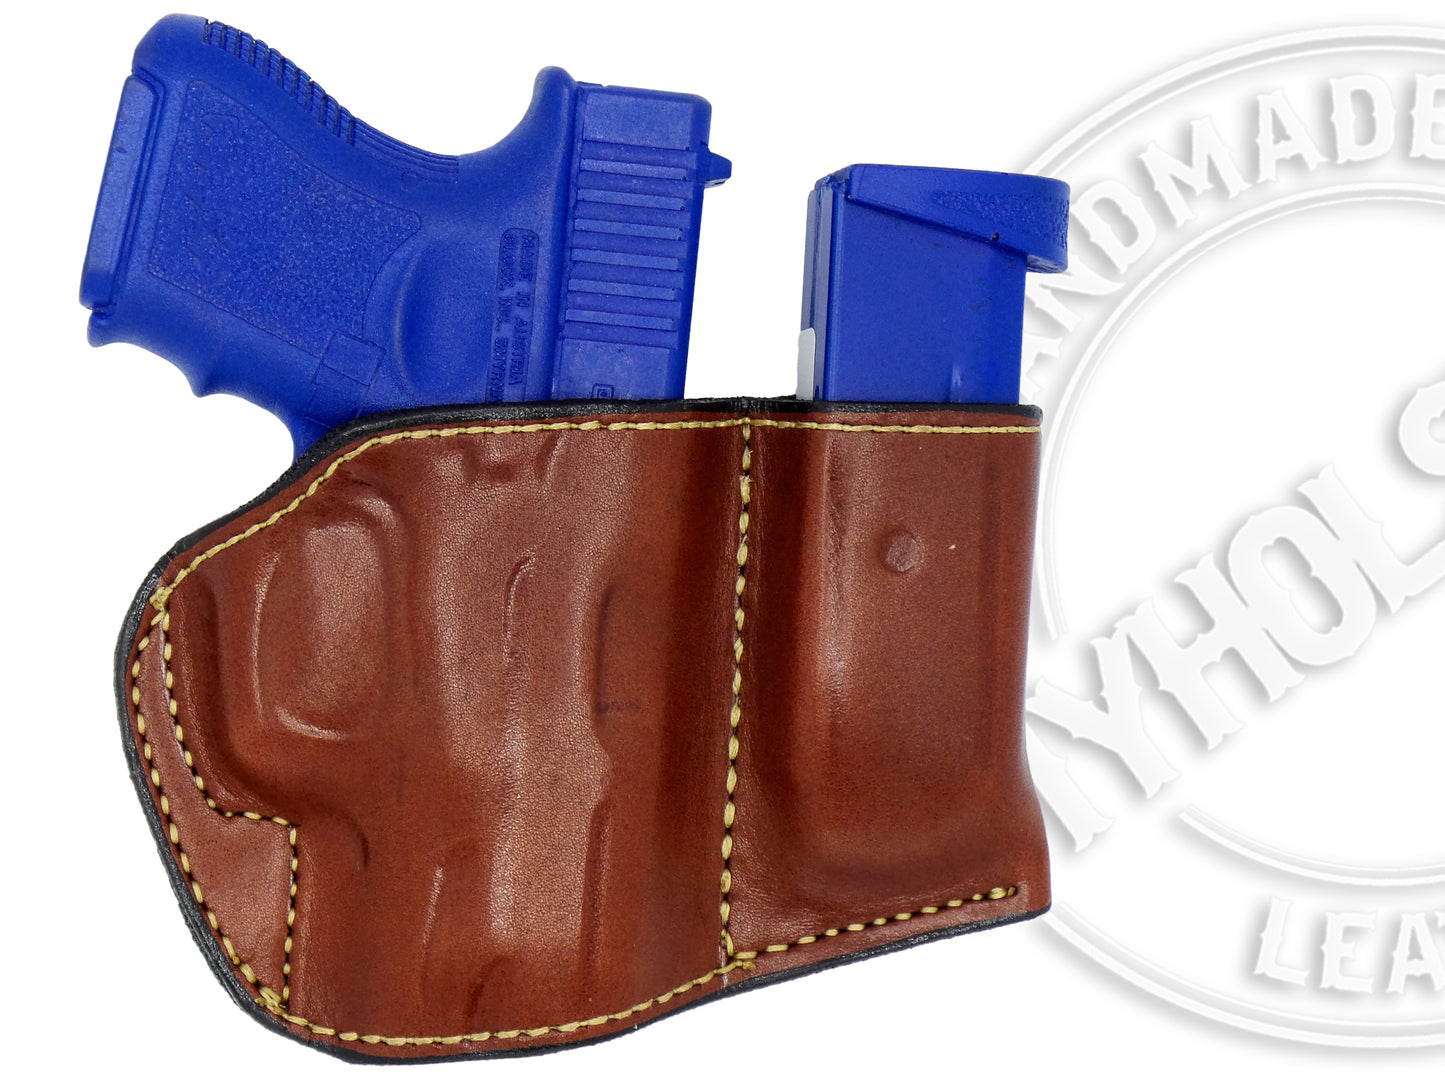 Bersa Thunder .380 ACP  Holster and Mag Pouch Combo - OWB Leather Belt Holster